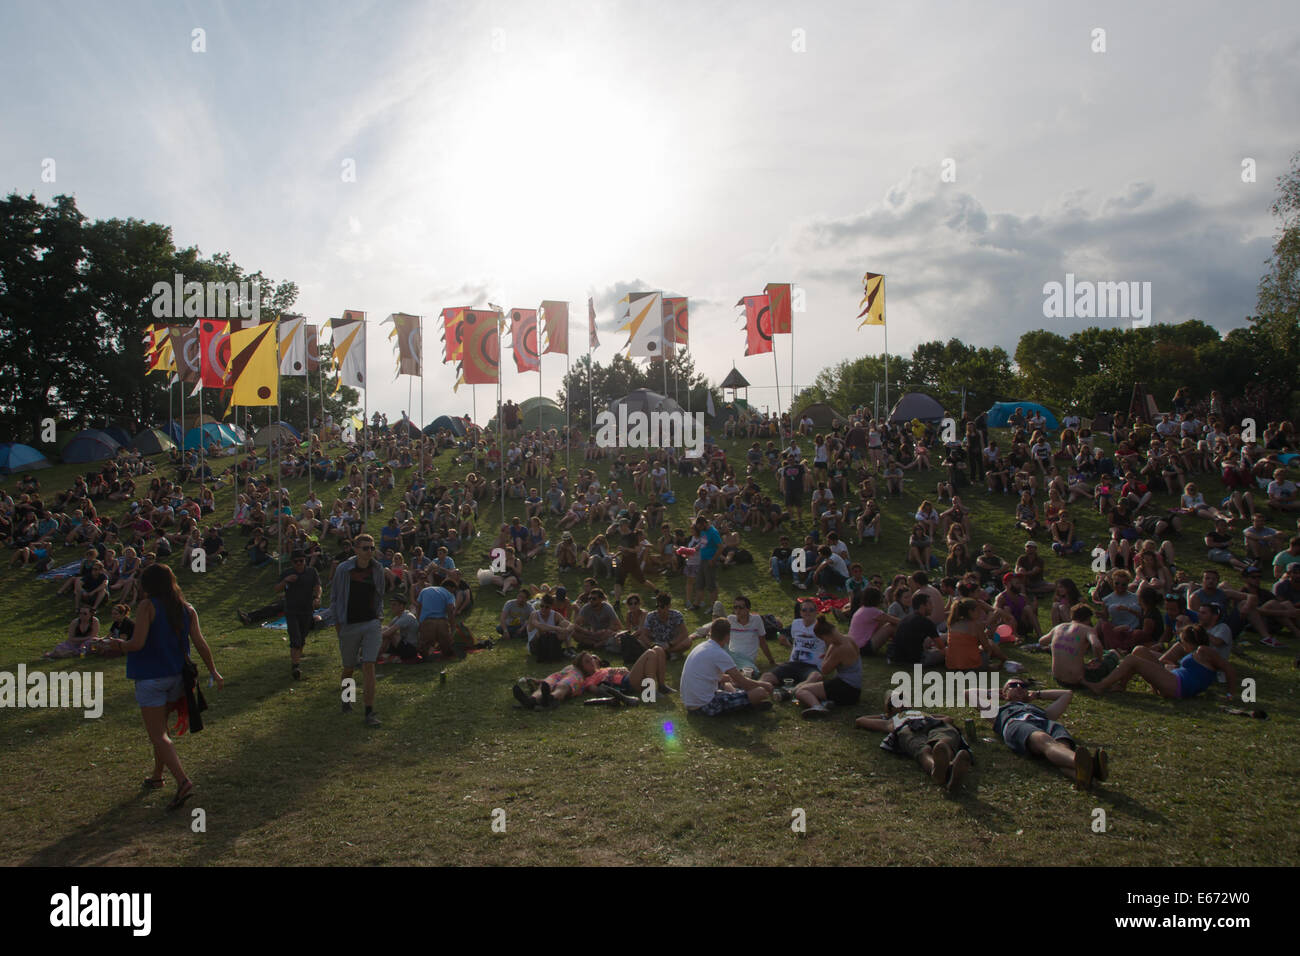 Budapest. 16th Aug, 2014. Festival goers rest on the grass during the Sziget (Hungarian for 'Island') Festival on the Obuda Island in Budapest, Hungary on August 16, 2014. The 22nd edition of the Sziget Festival lasts from August 11 to August 17. It is one of the largest music festivals in Europe, attracting nearly 400,000 people every year. Credit:  Attila Volgyi/Xinhua/Alamy Live News Stock Photo